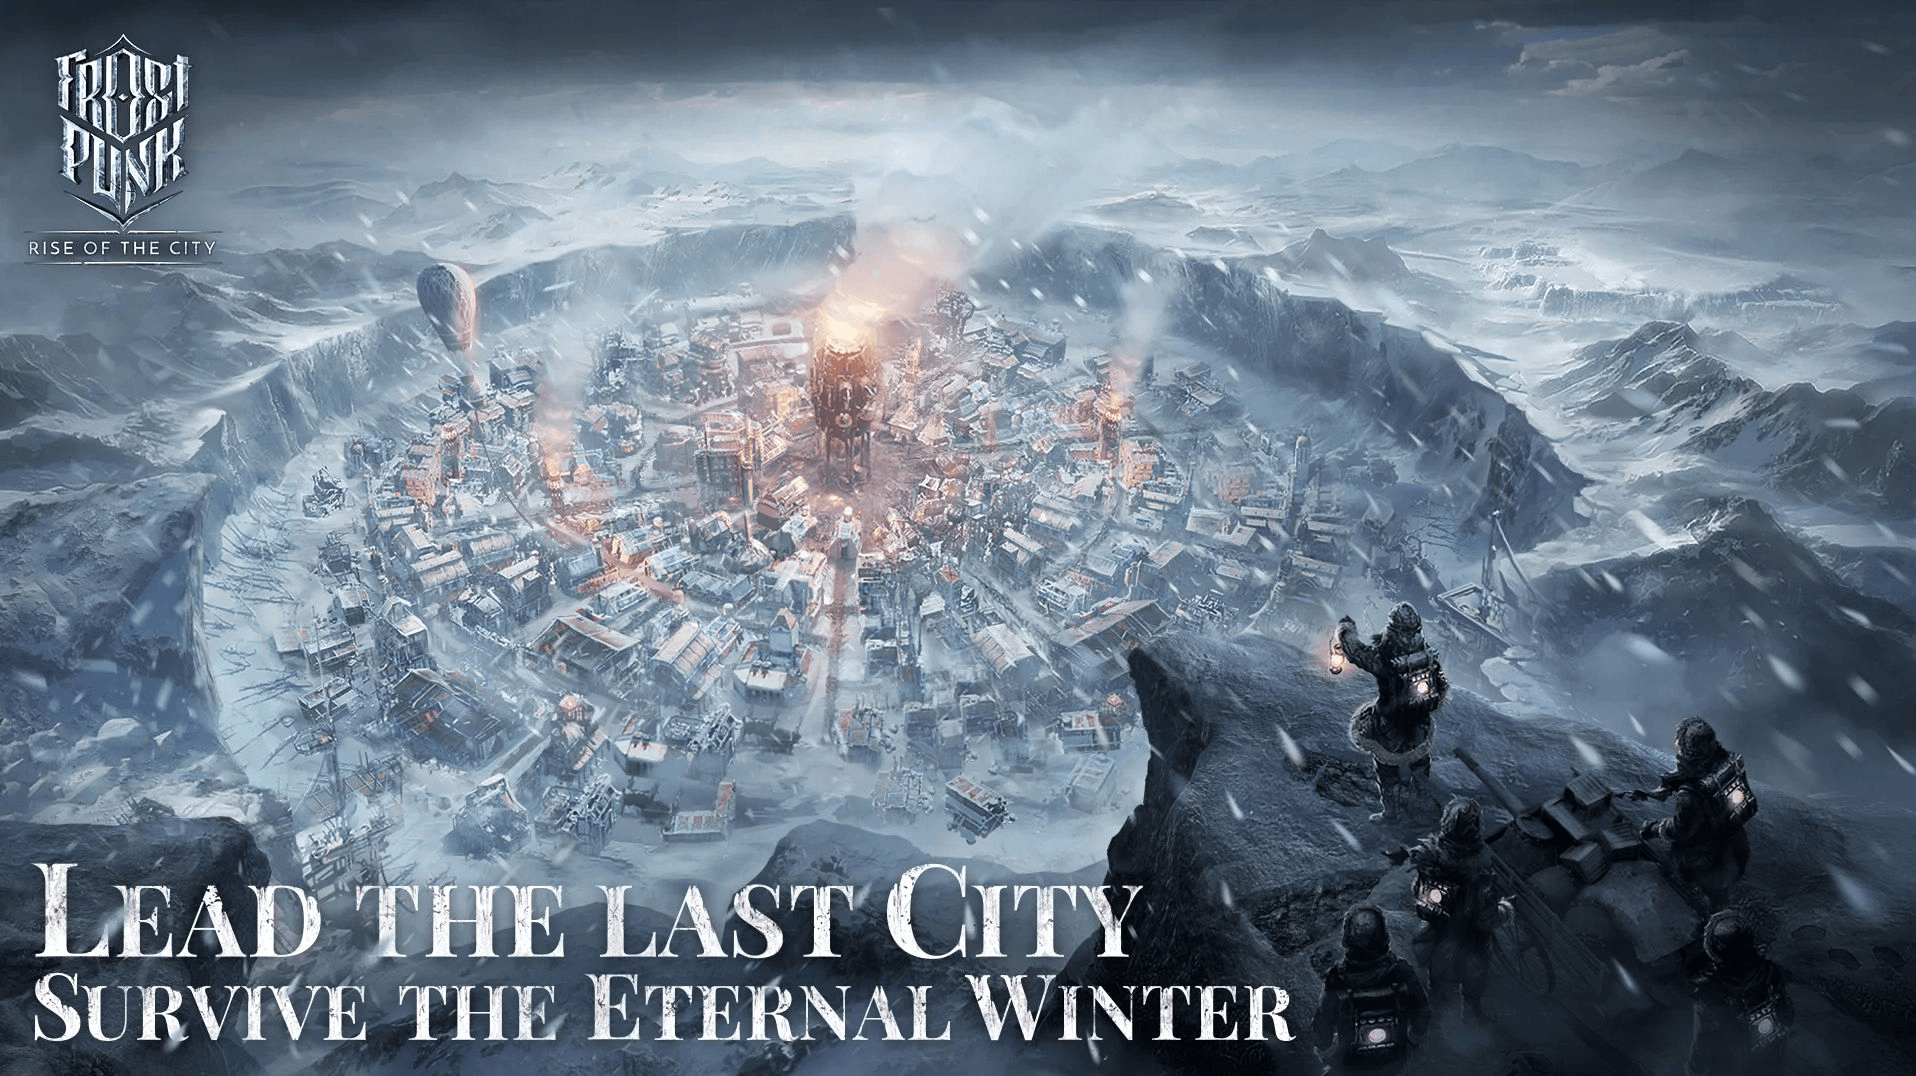 How to Install and Play Frostpunk: Beyond the Ice on PC with BlueStacks